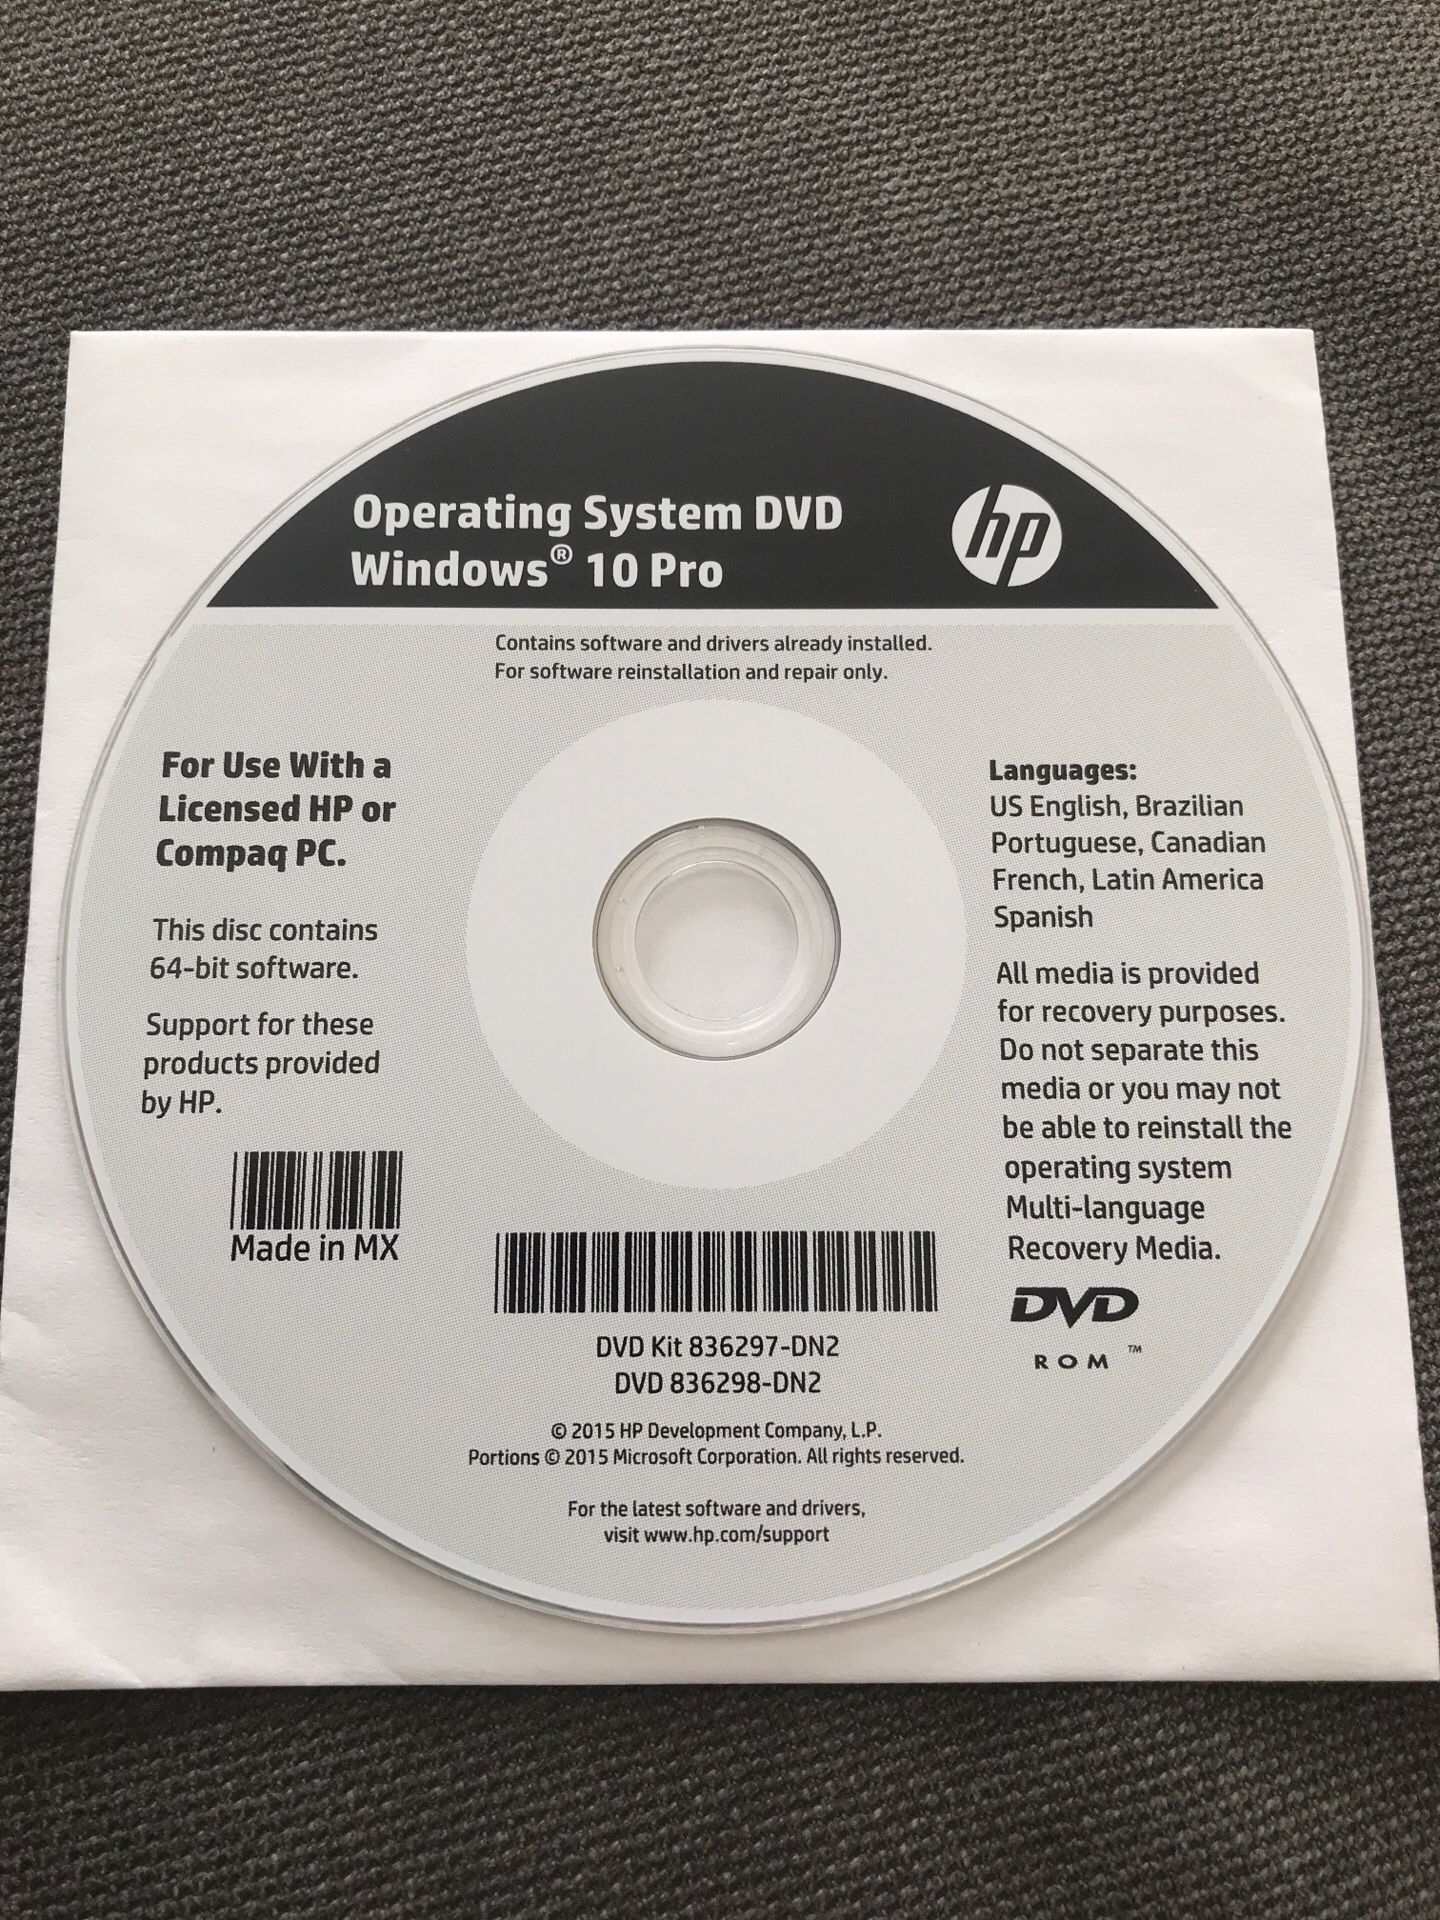 Windows 10 Pro Operating System DVD for HP